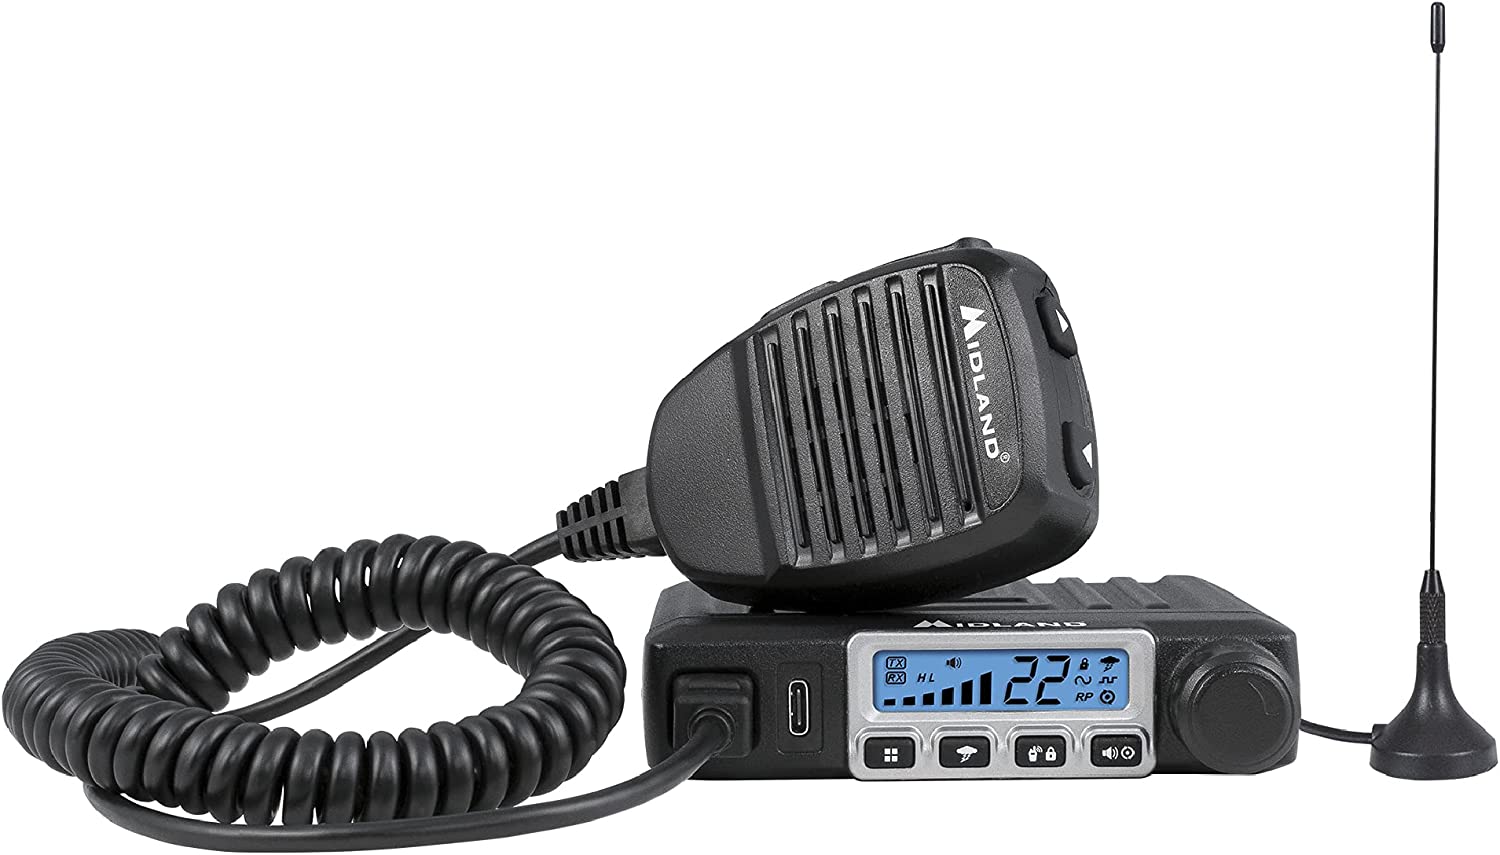 Midland - MXT115, 15 Watt GMRS MicroMobile Two-Way Radio - 8 Repeater Channels, 142 Privacy Codes, NOAA Weather Scan + Alert & External Magnetic Mount Antenna